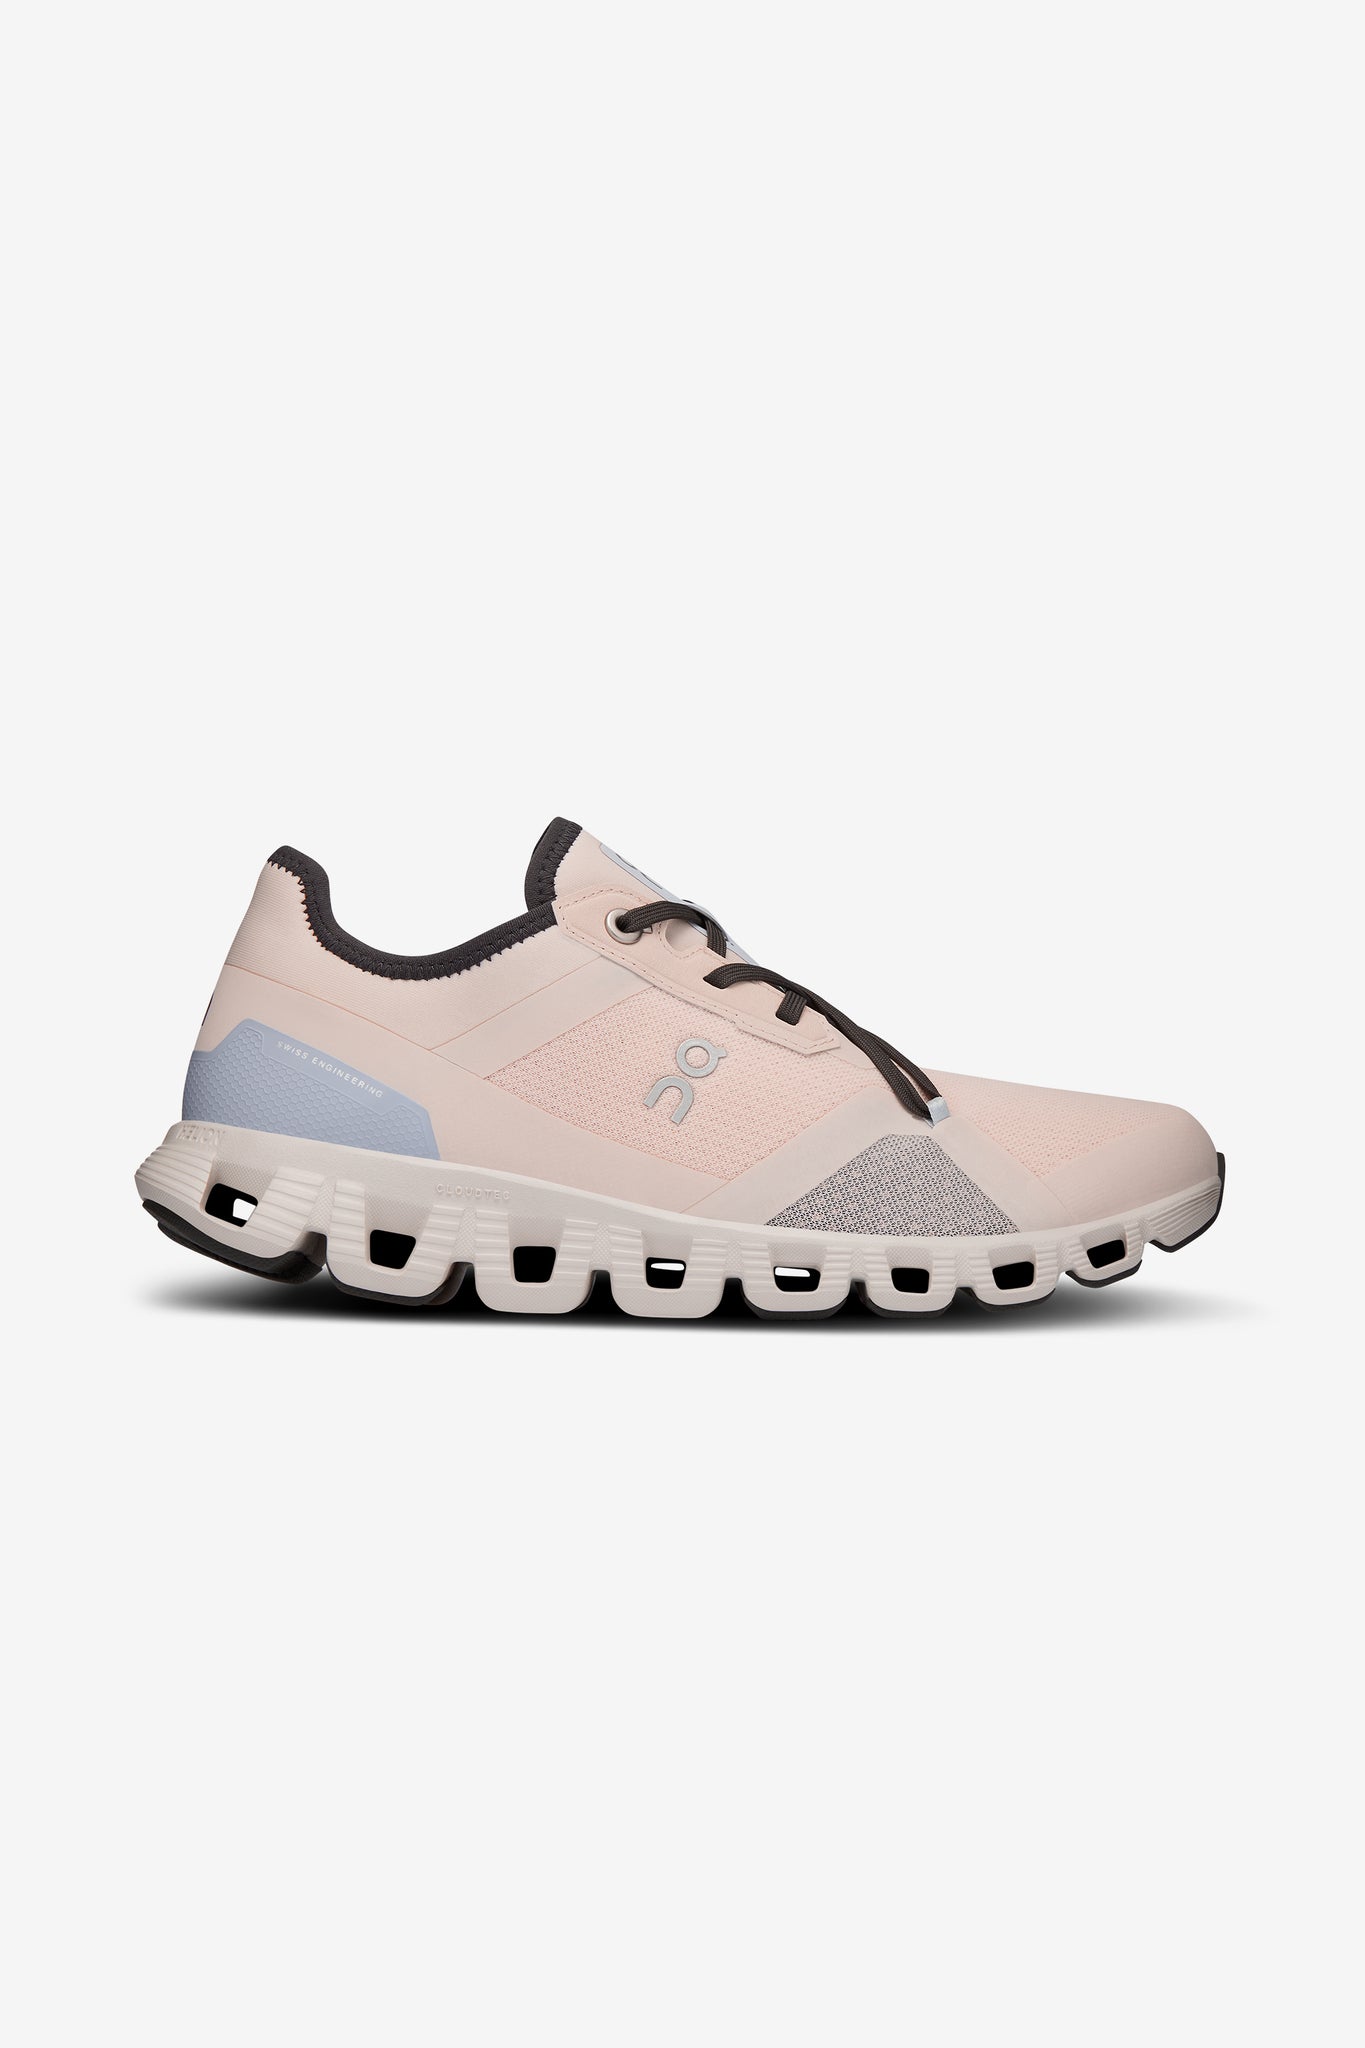 ON | Women's Cloud X 3 AD in Shell/Heather